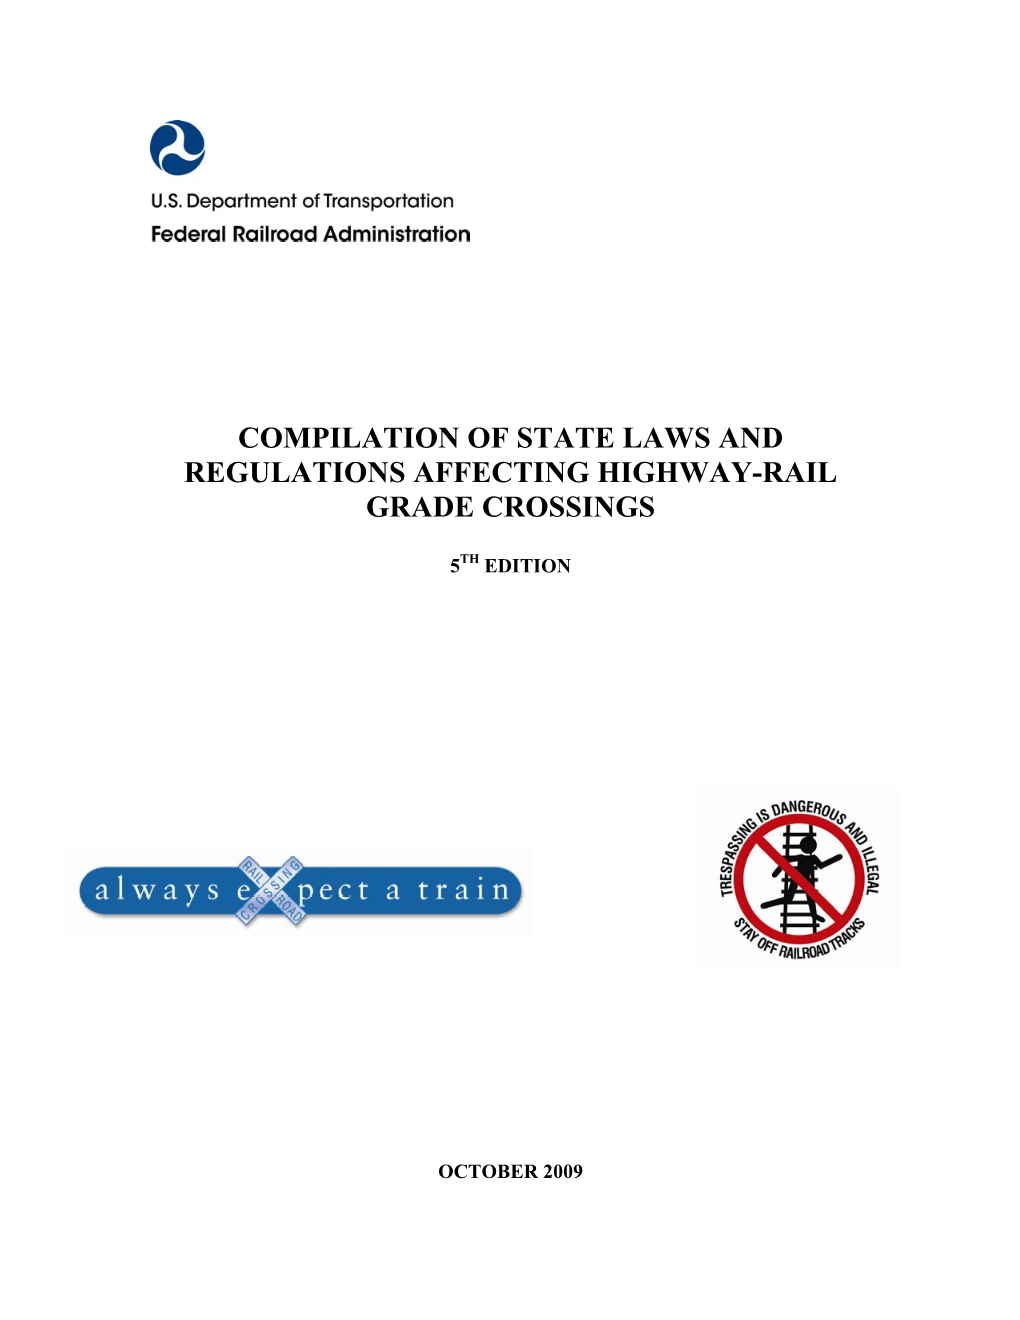 Compilation of State Laws and Regulations Affecting Highway Rail